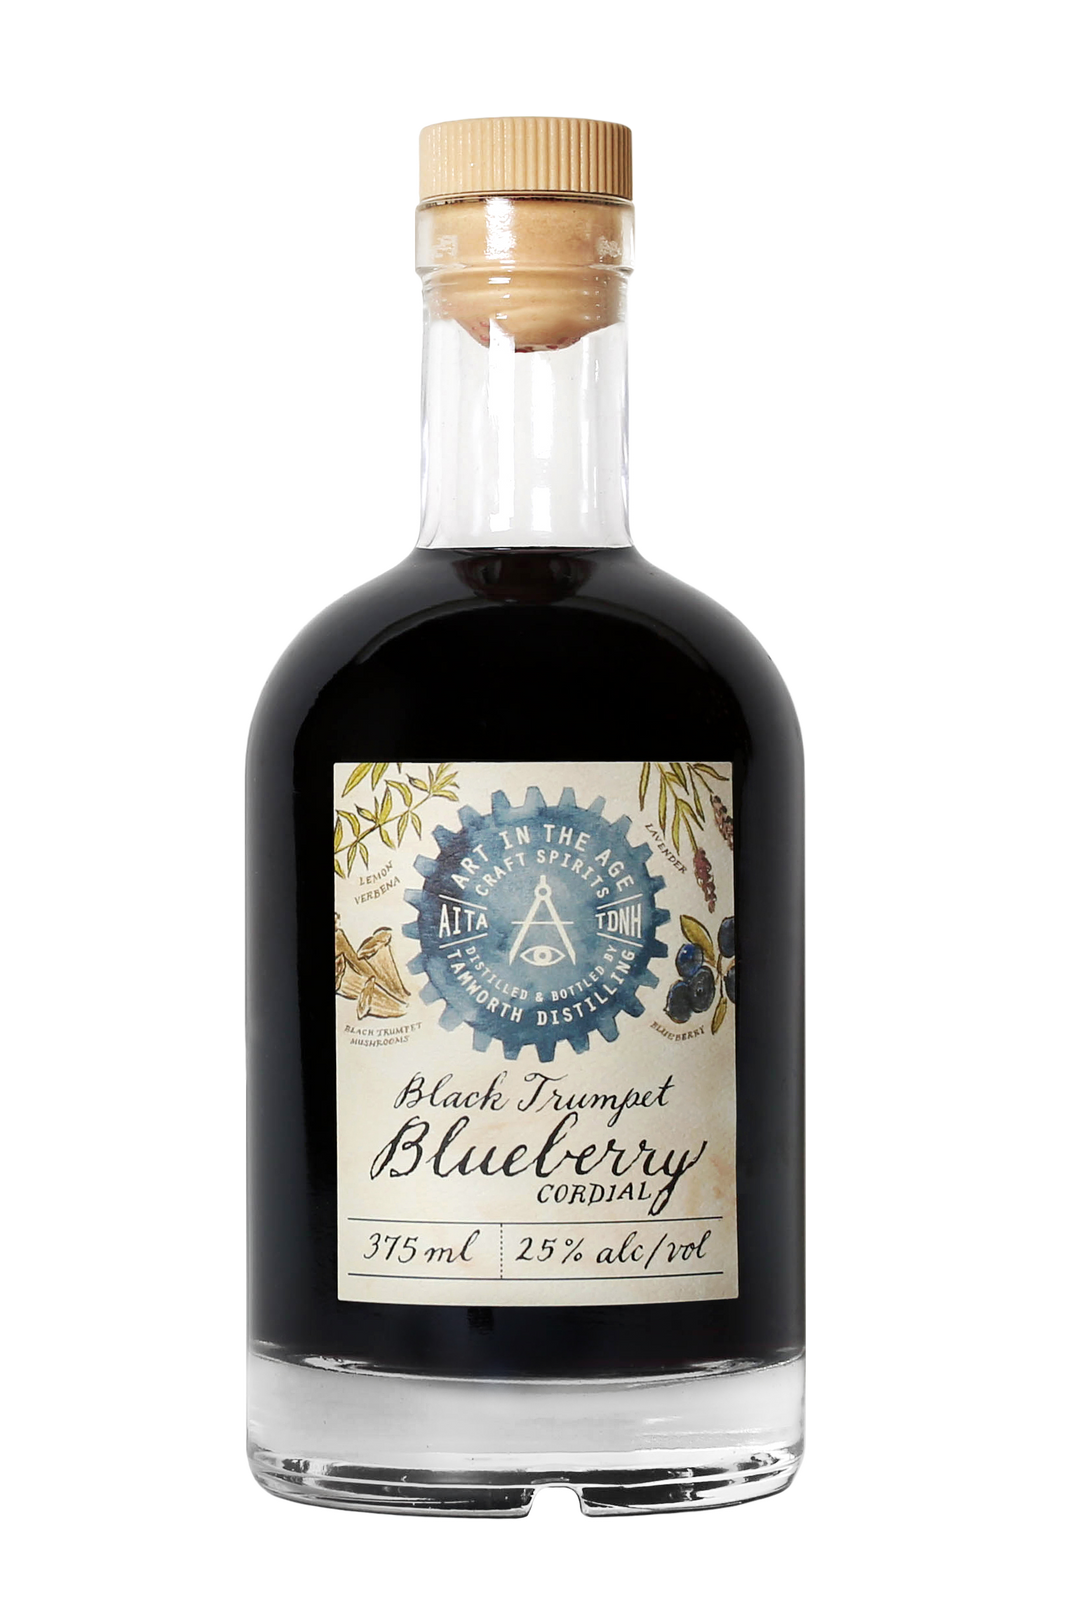 Tamworth Art in the Age Black Trumpet Blueberry Cordial